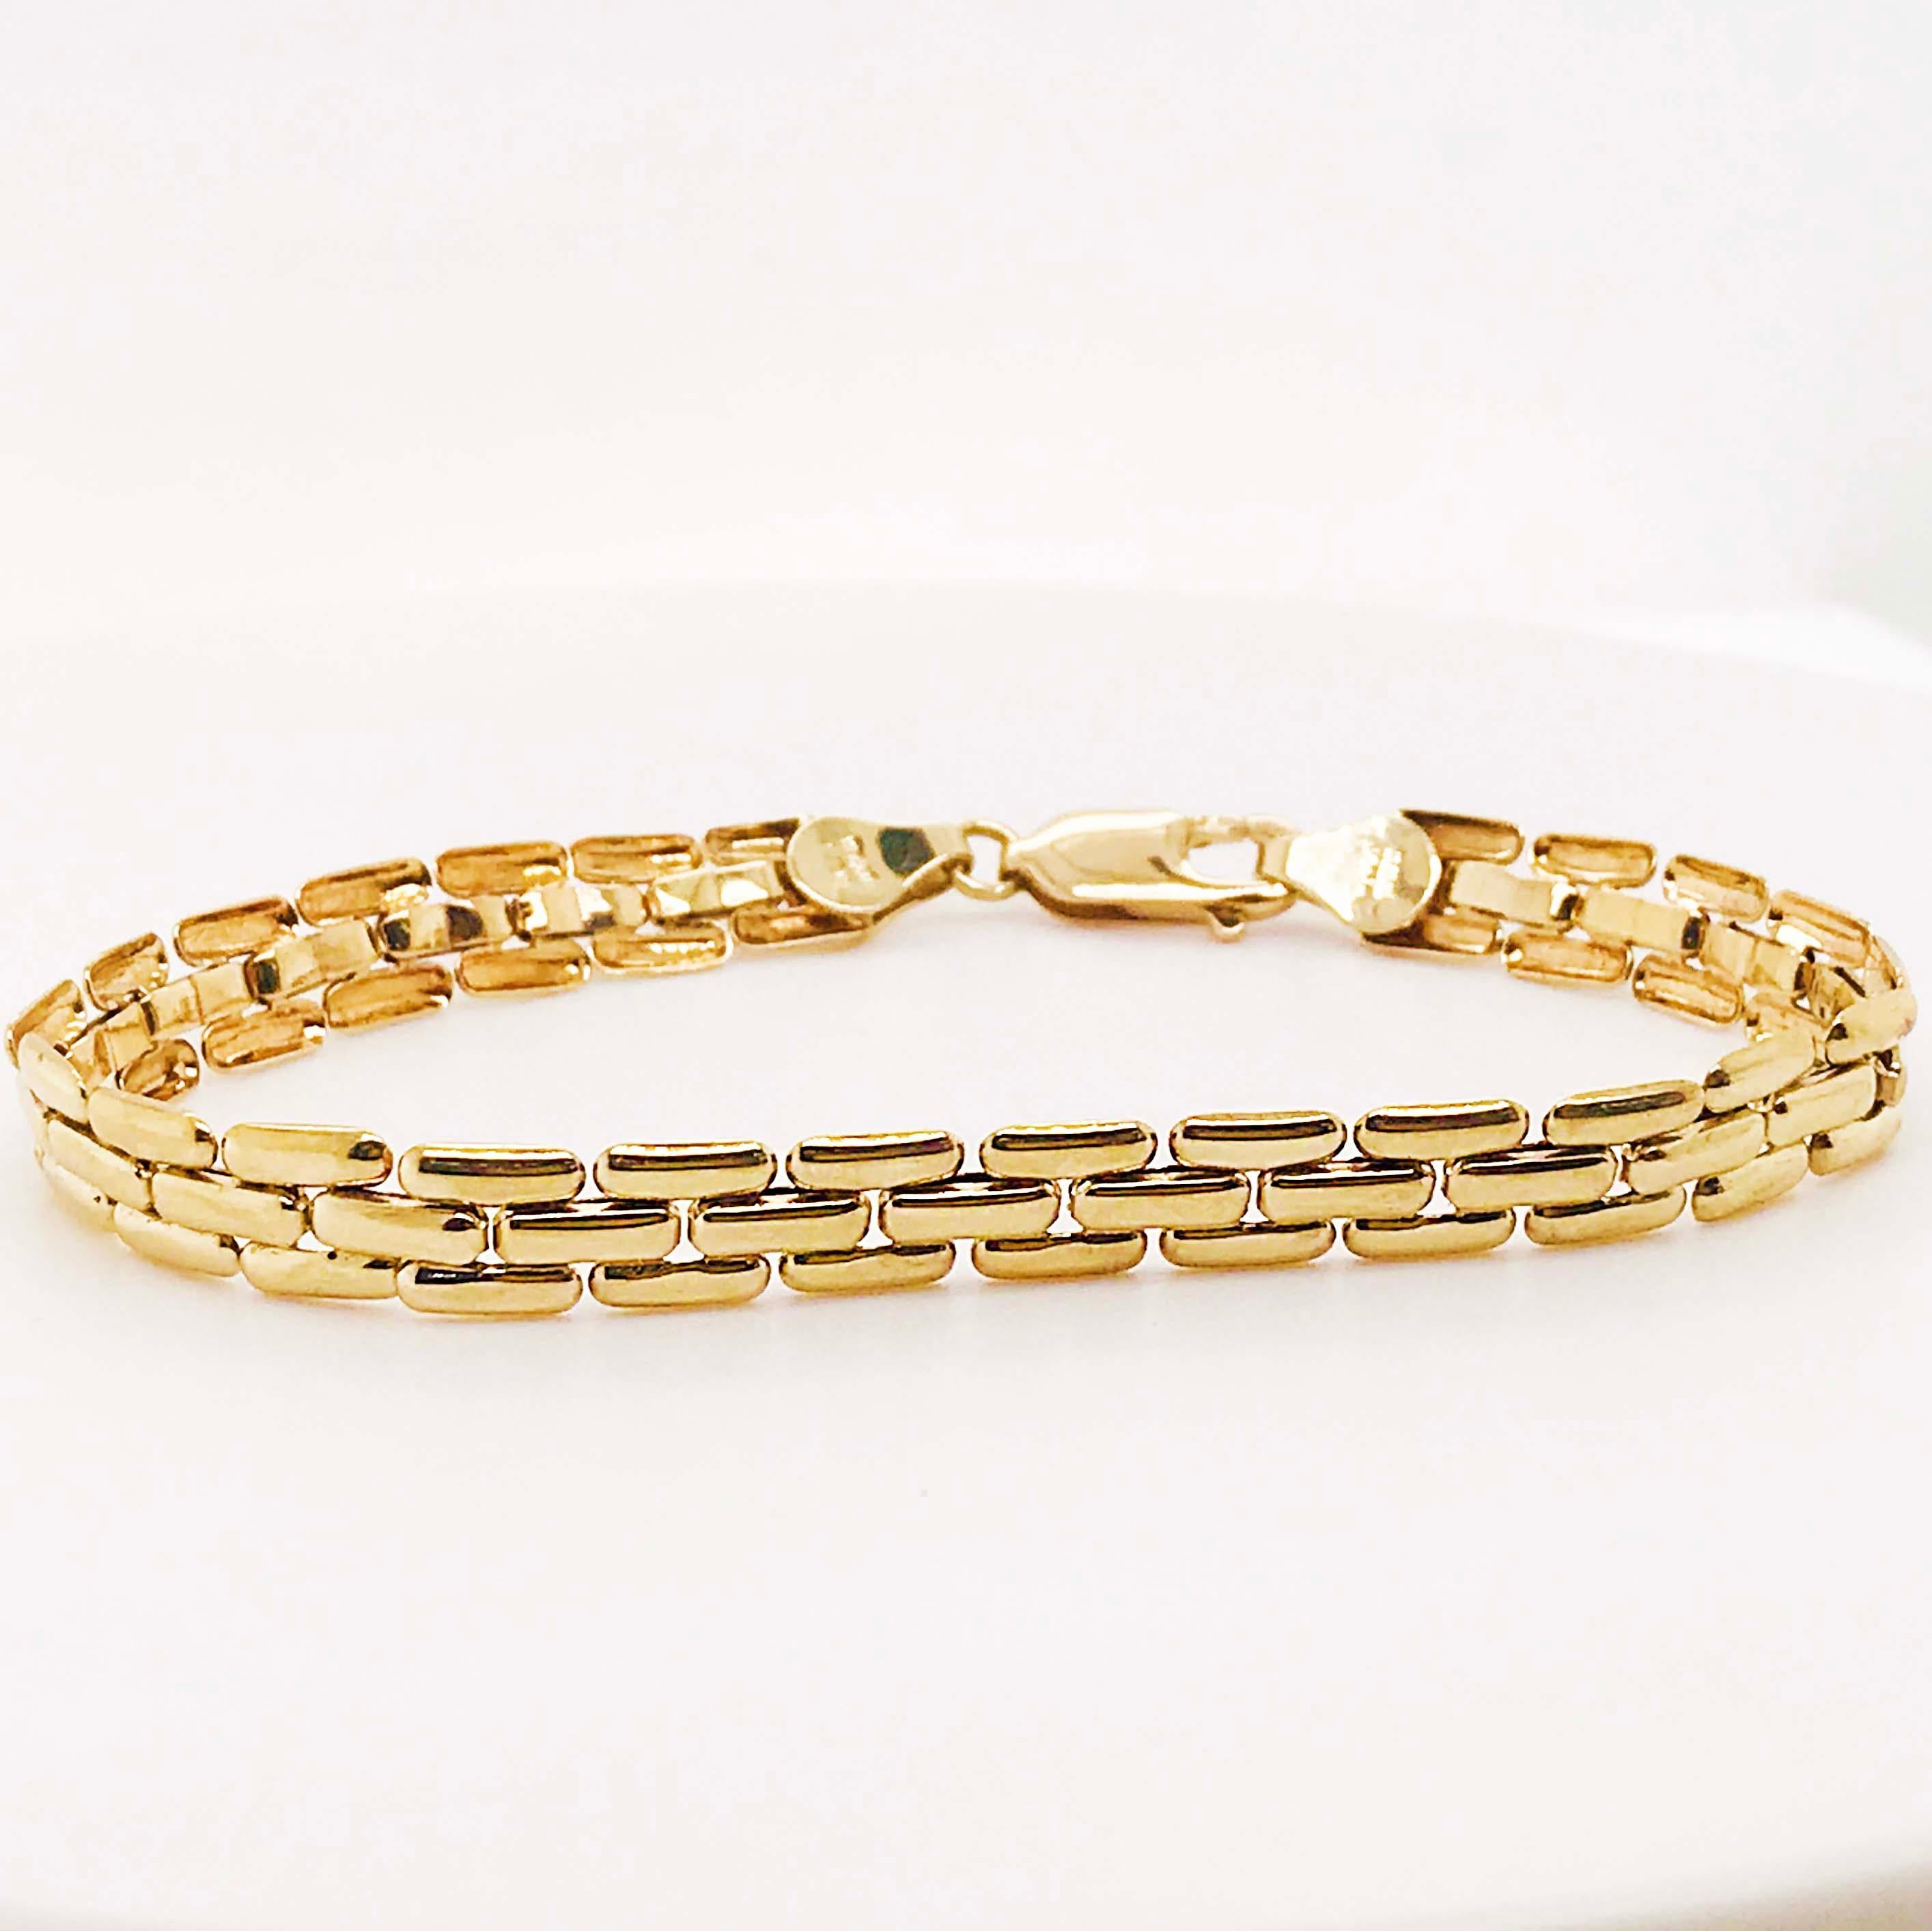 Gold Panther Chain Bracelet with Large Lobster Clasp, 14 Karat Yellow Gold 6